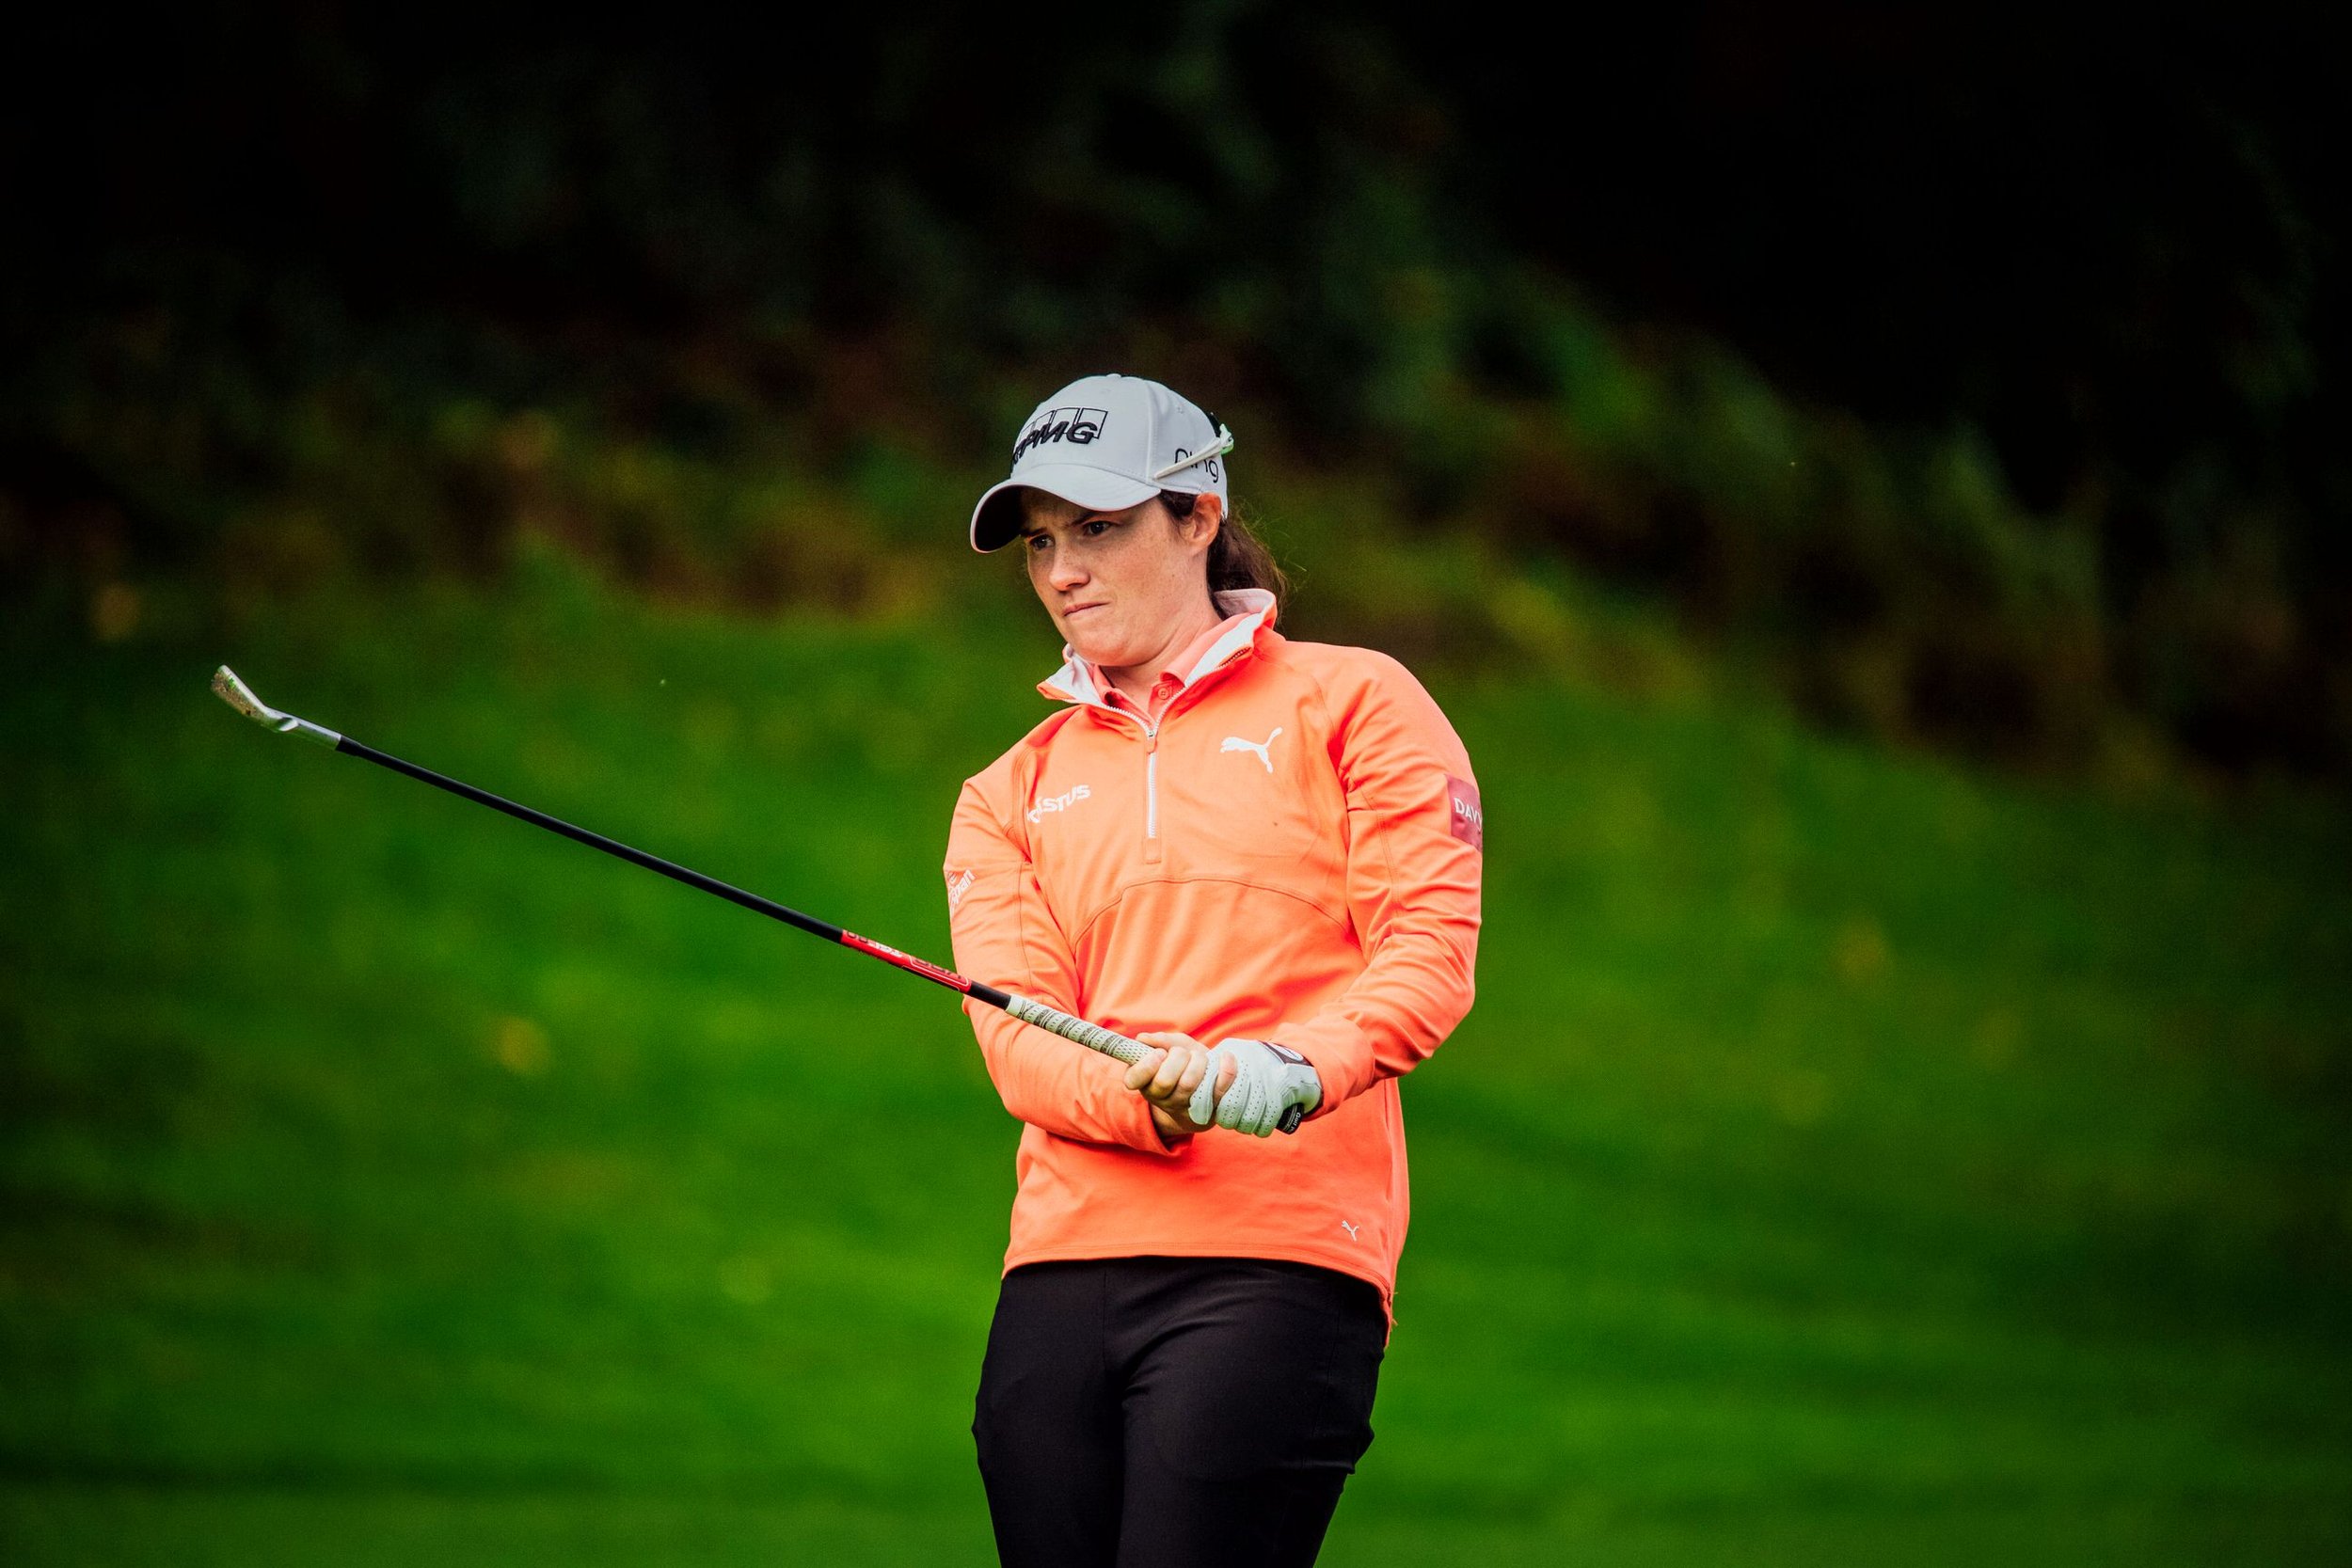  No Repro FeeLeona Maguire pictured playing the 8th hole on her opening round of the KPMG Women's Irish Open in Dromoland Castle Golf Club, Newmarket On Fergus, Clare today.Pic. Brian Arthur 